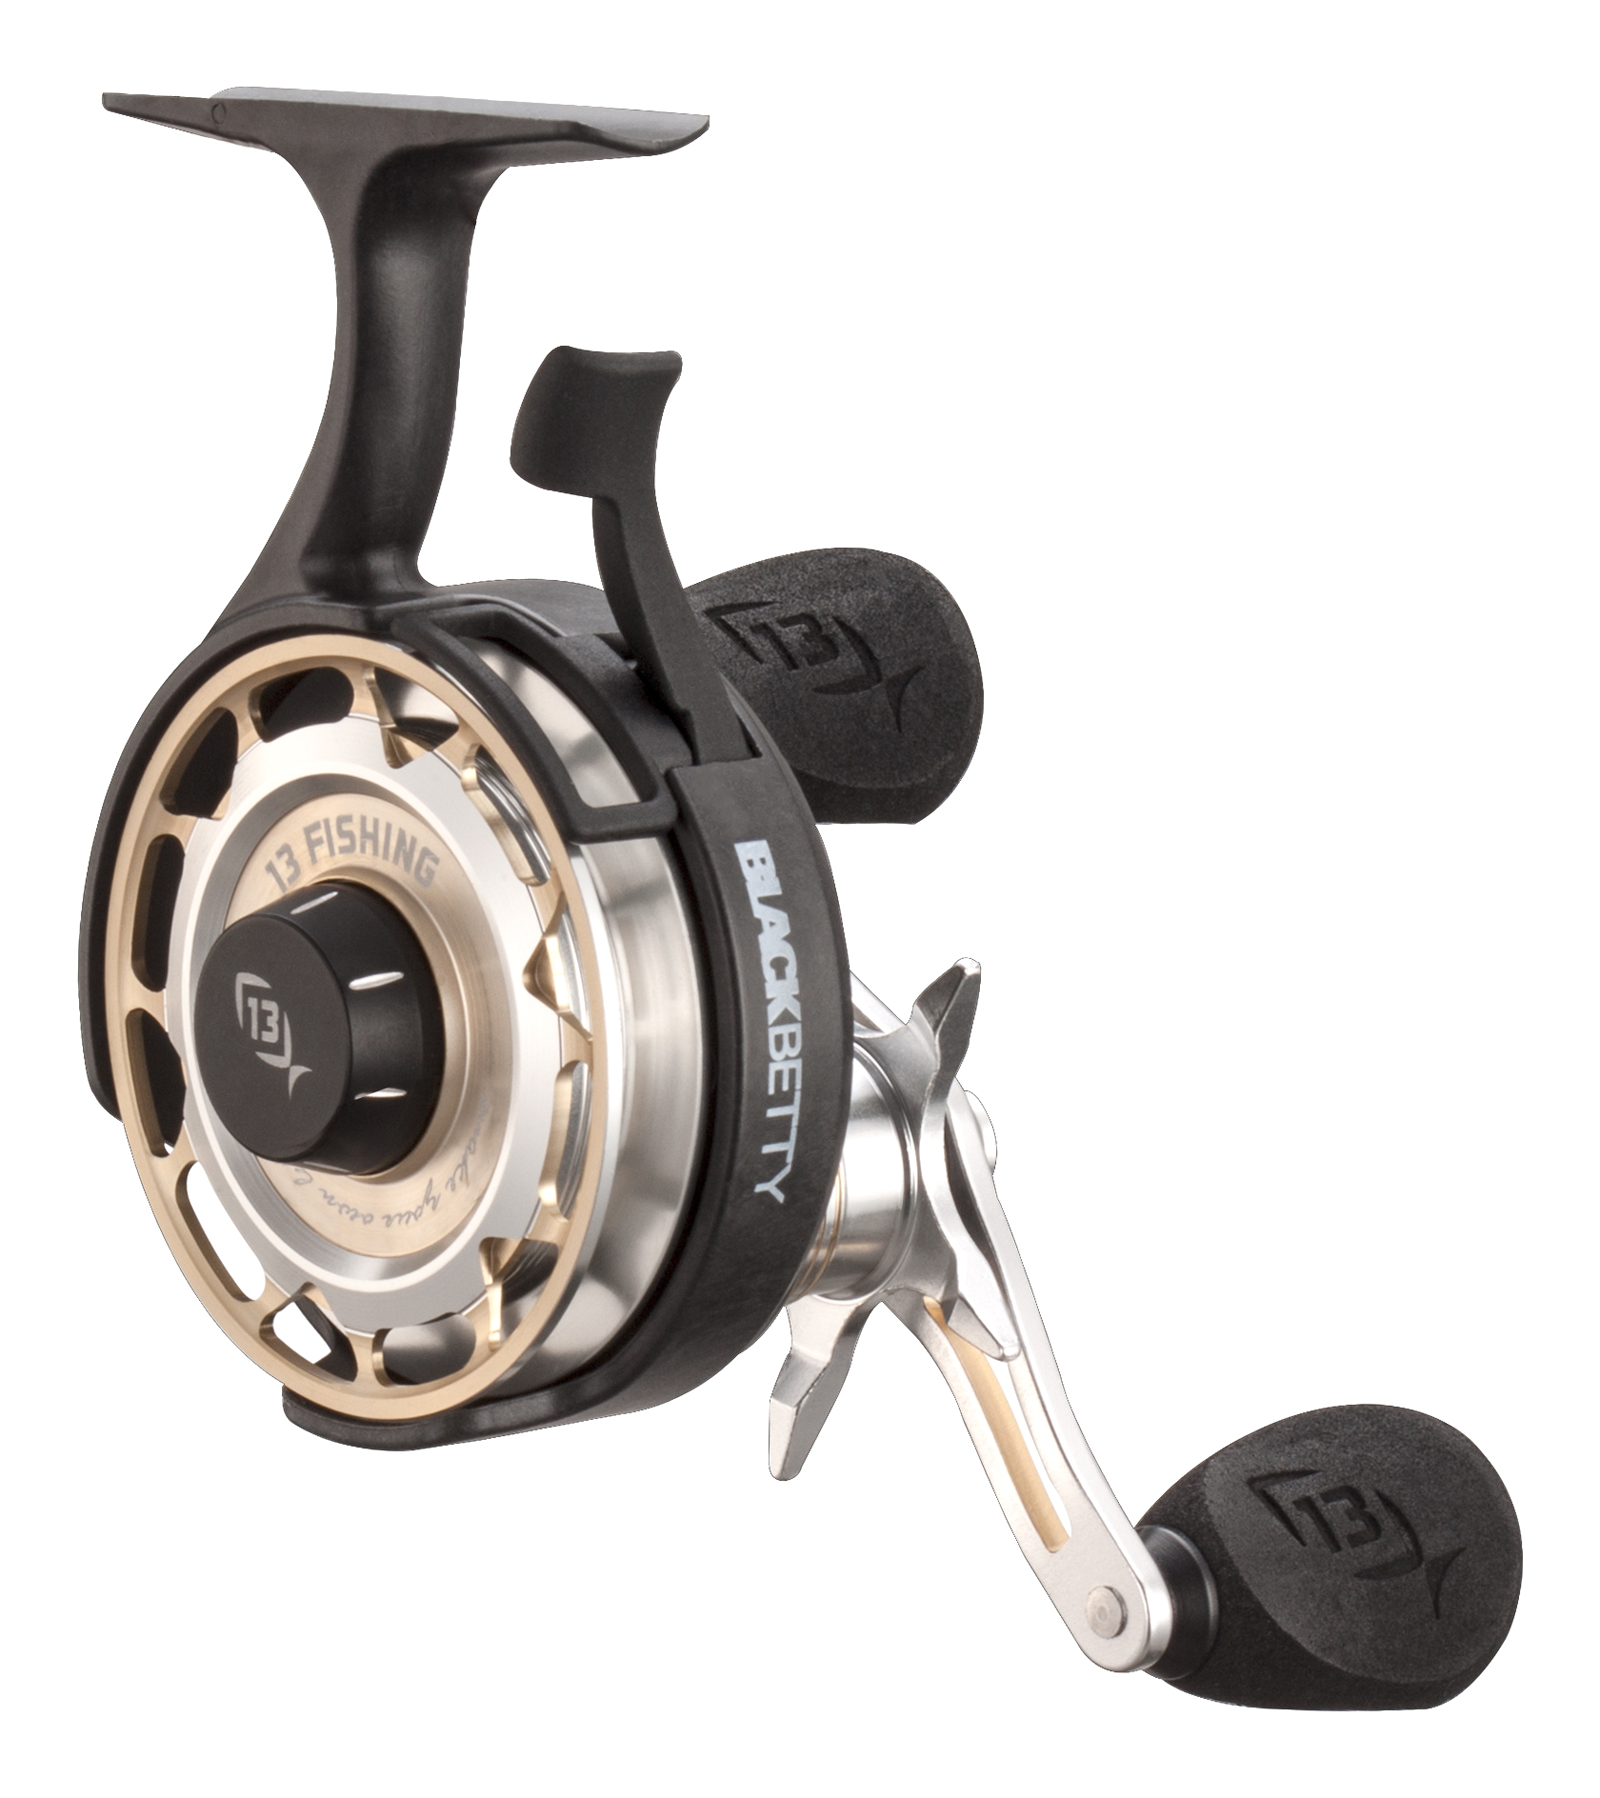 13 Fishing Black Betty FreeFall Carbon Inline Ice Reel, Left Hand Retrieve  - 723670, Ice Fishing Reels at Sportsman's Guide